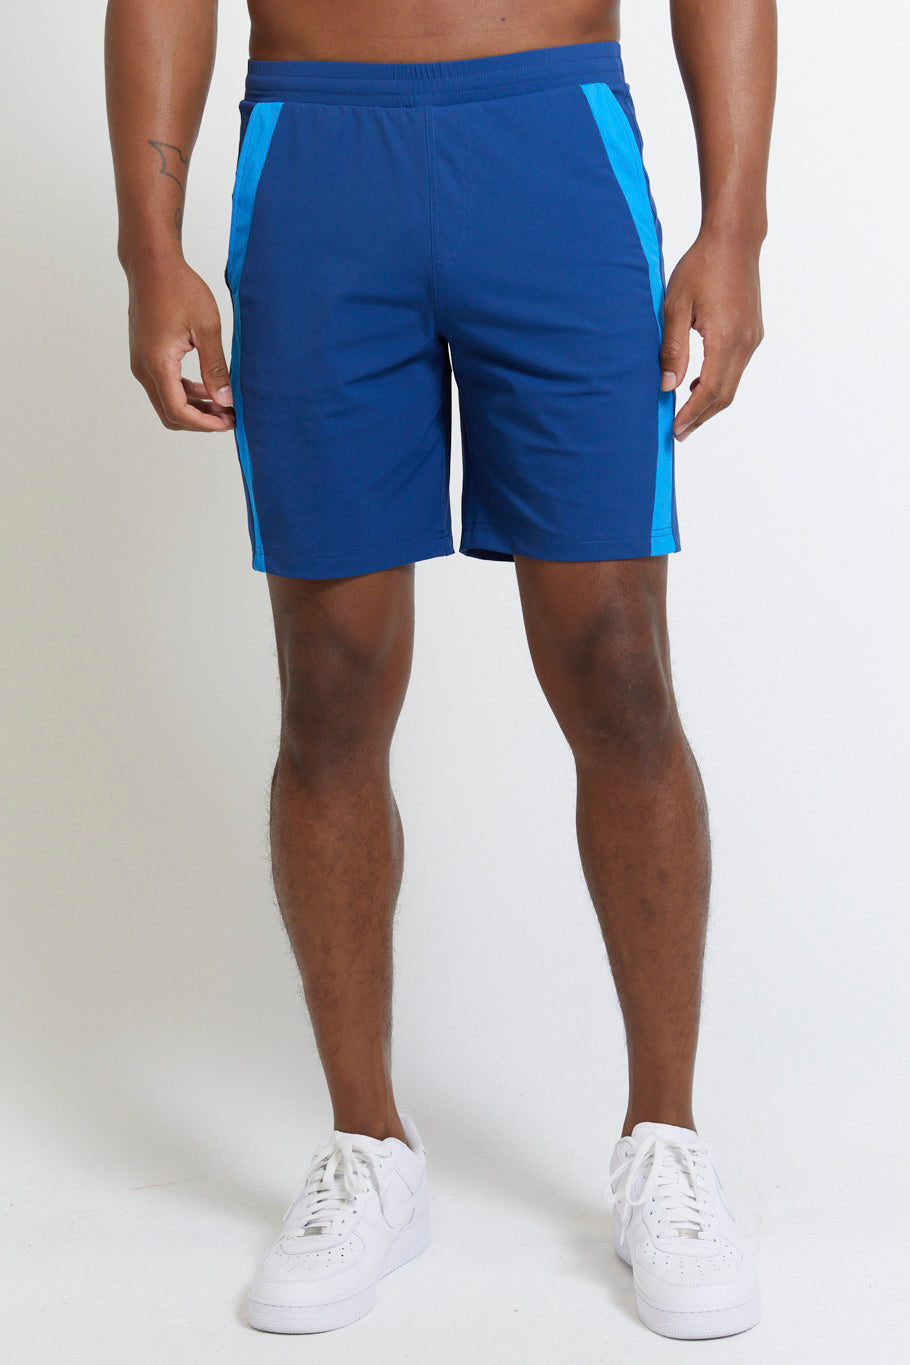 Image of the parnell tennis short in admiral